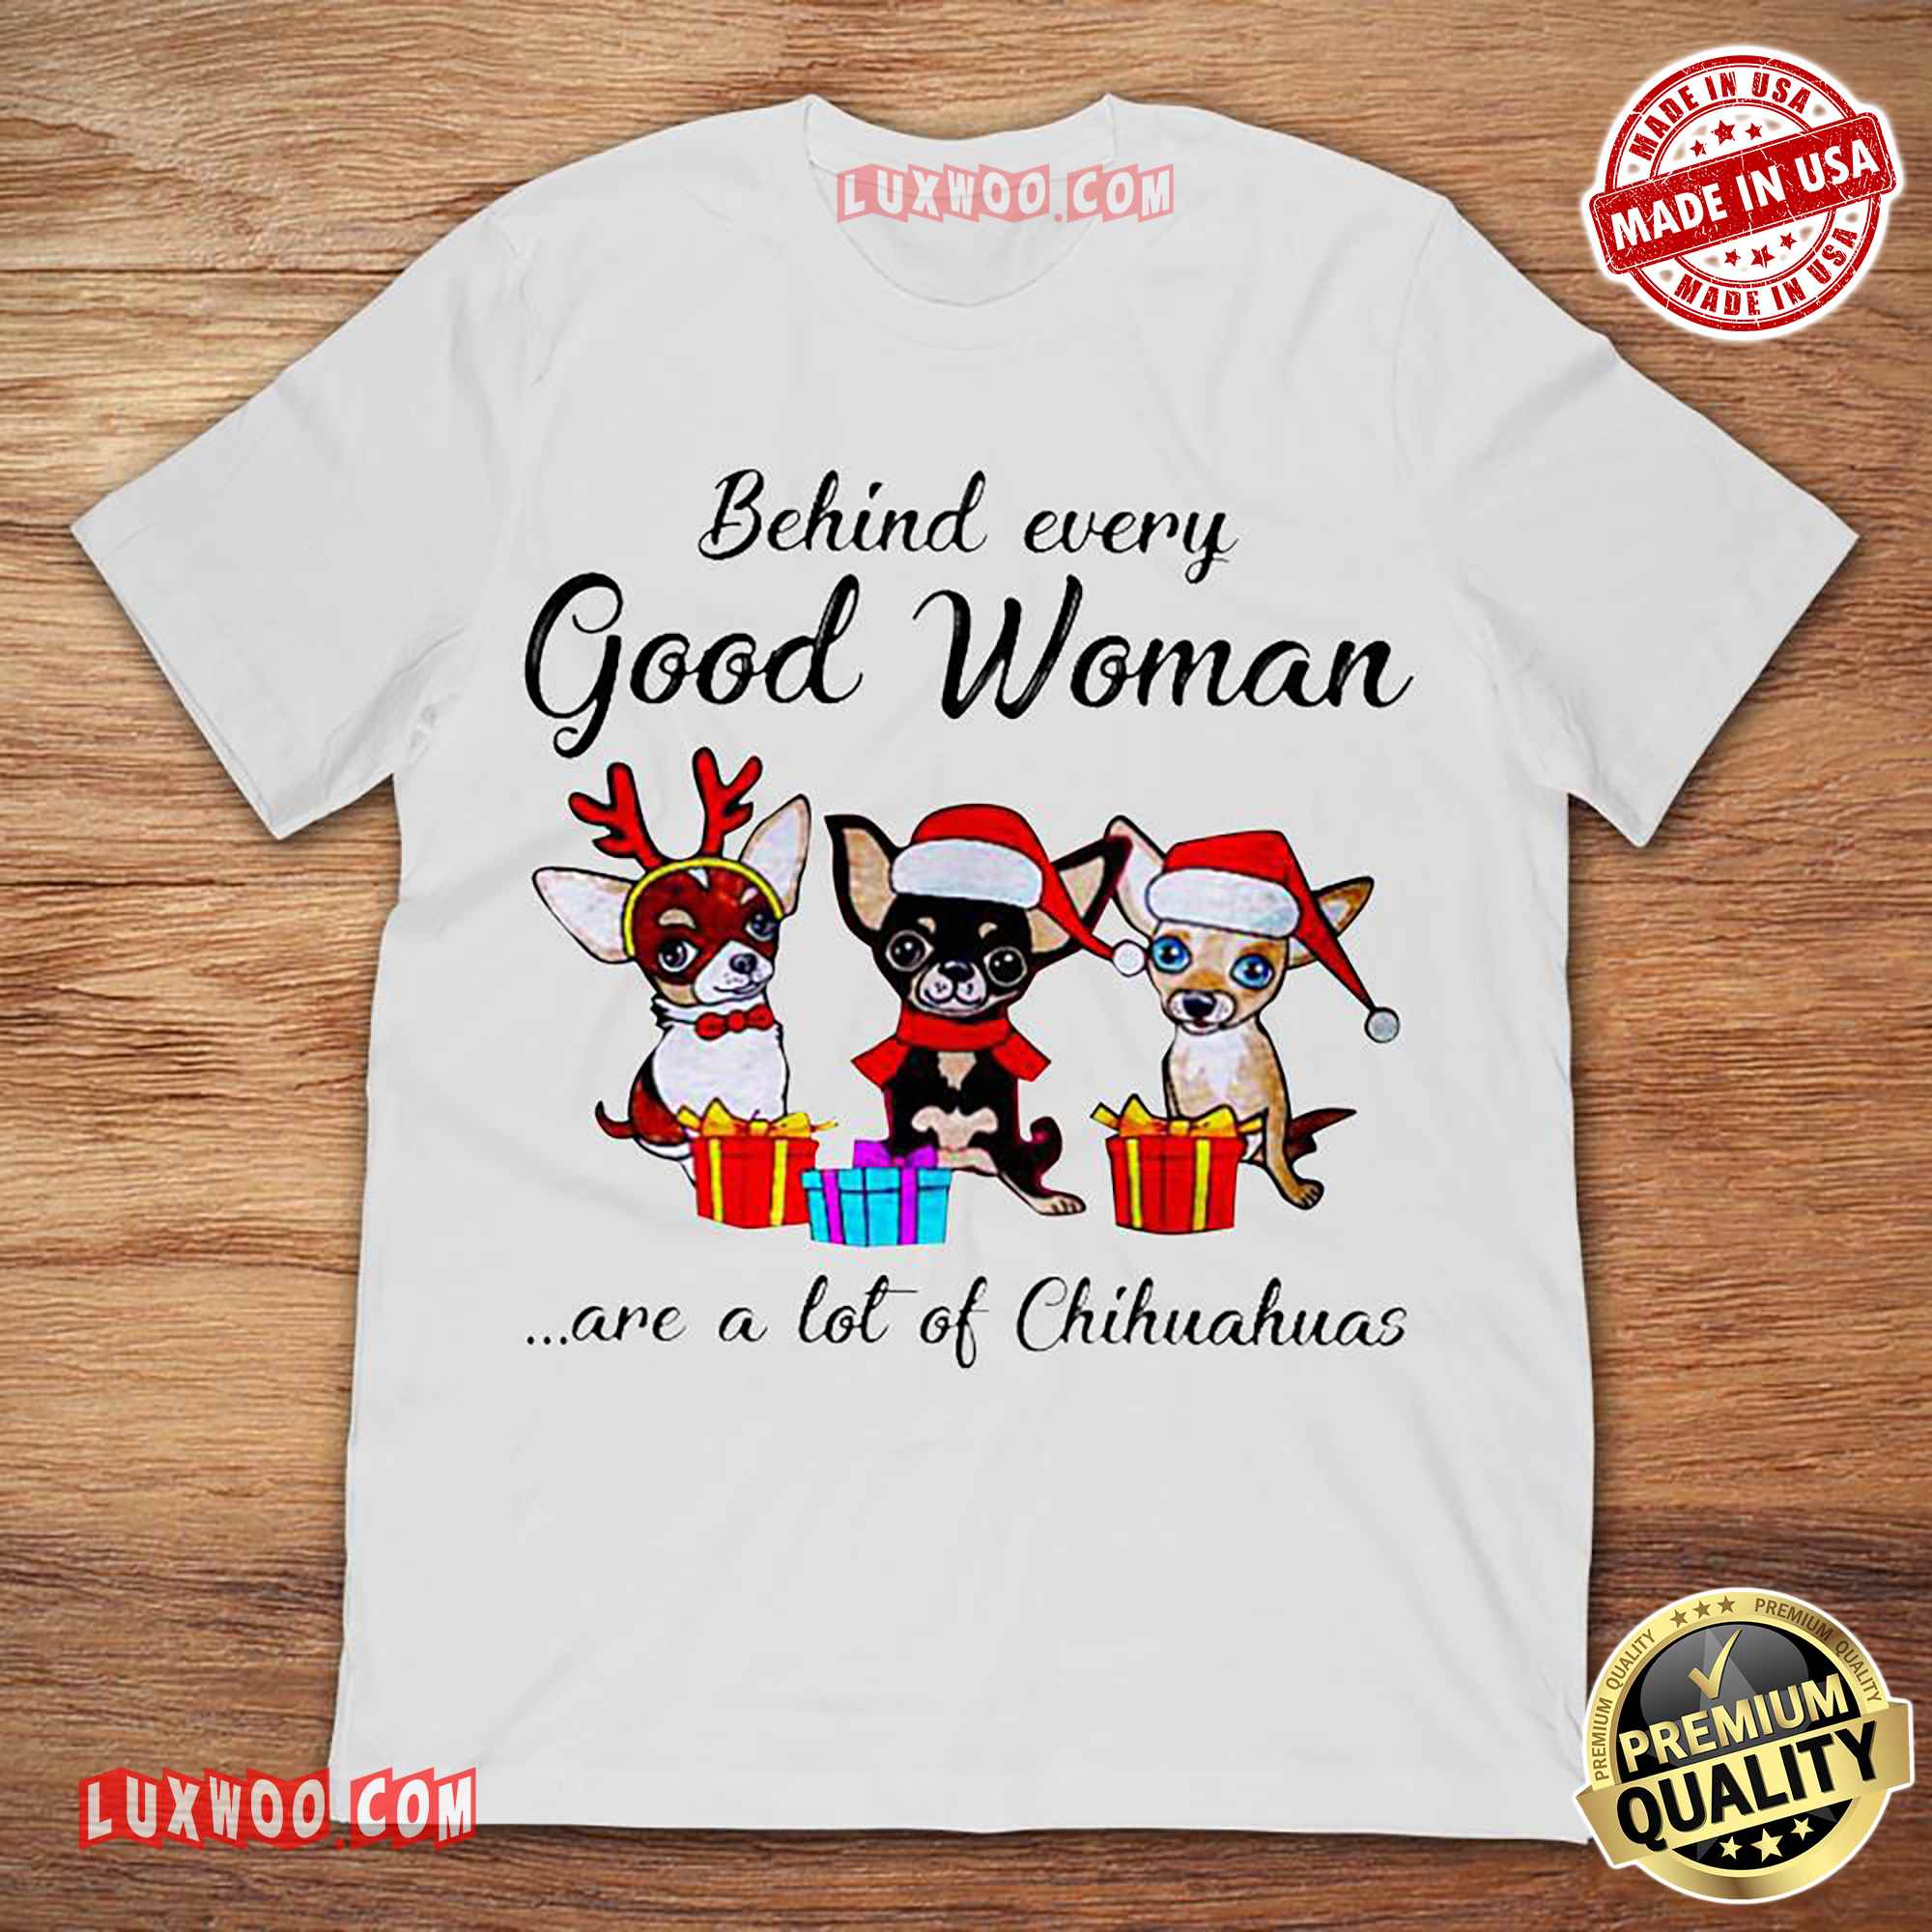 Behind Every Good Woman Are A Lot Of Chihuahuas Tshirt